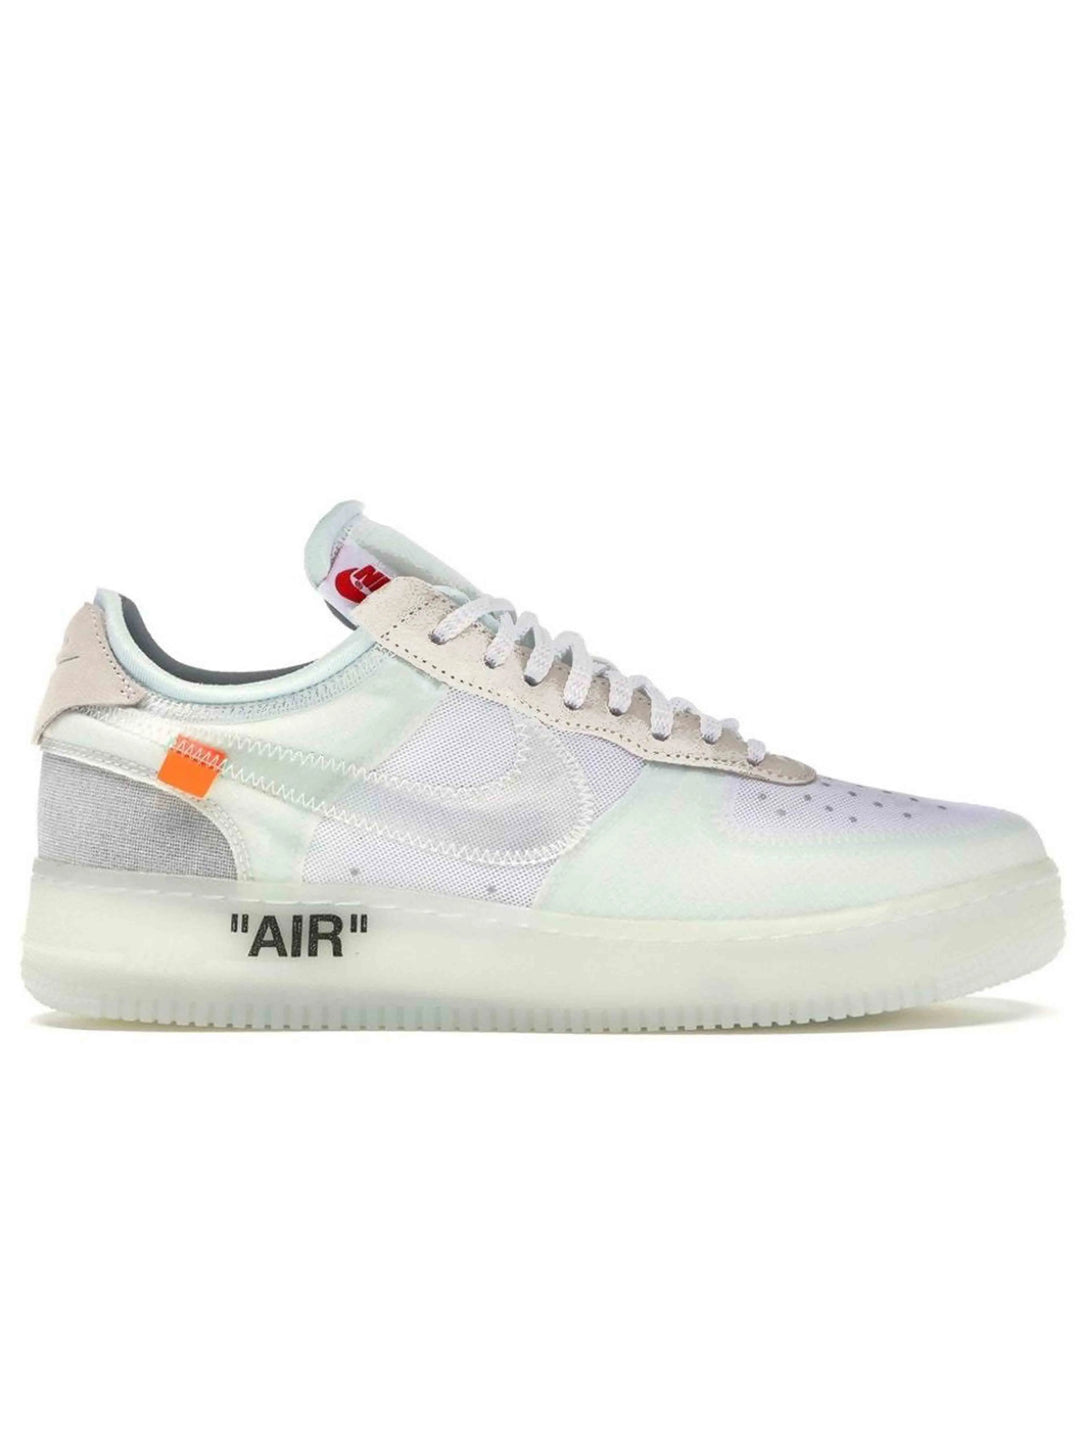 Nike X Off-White Air Force 1 The Ten [2017] Prior